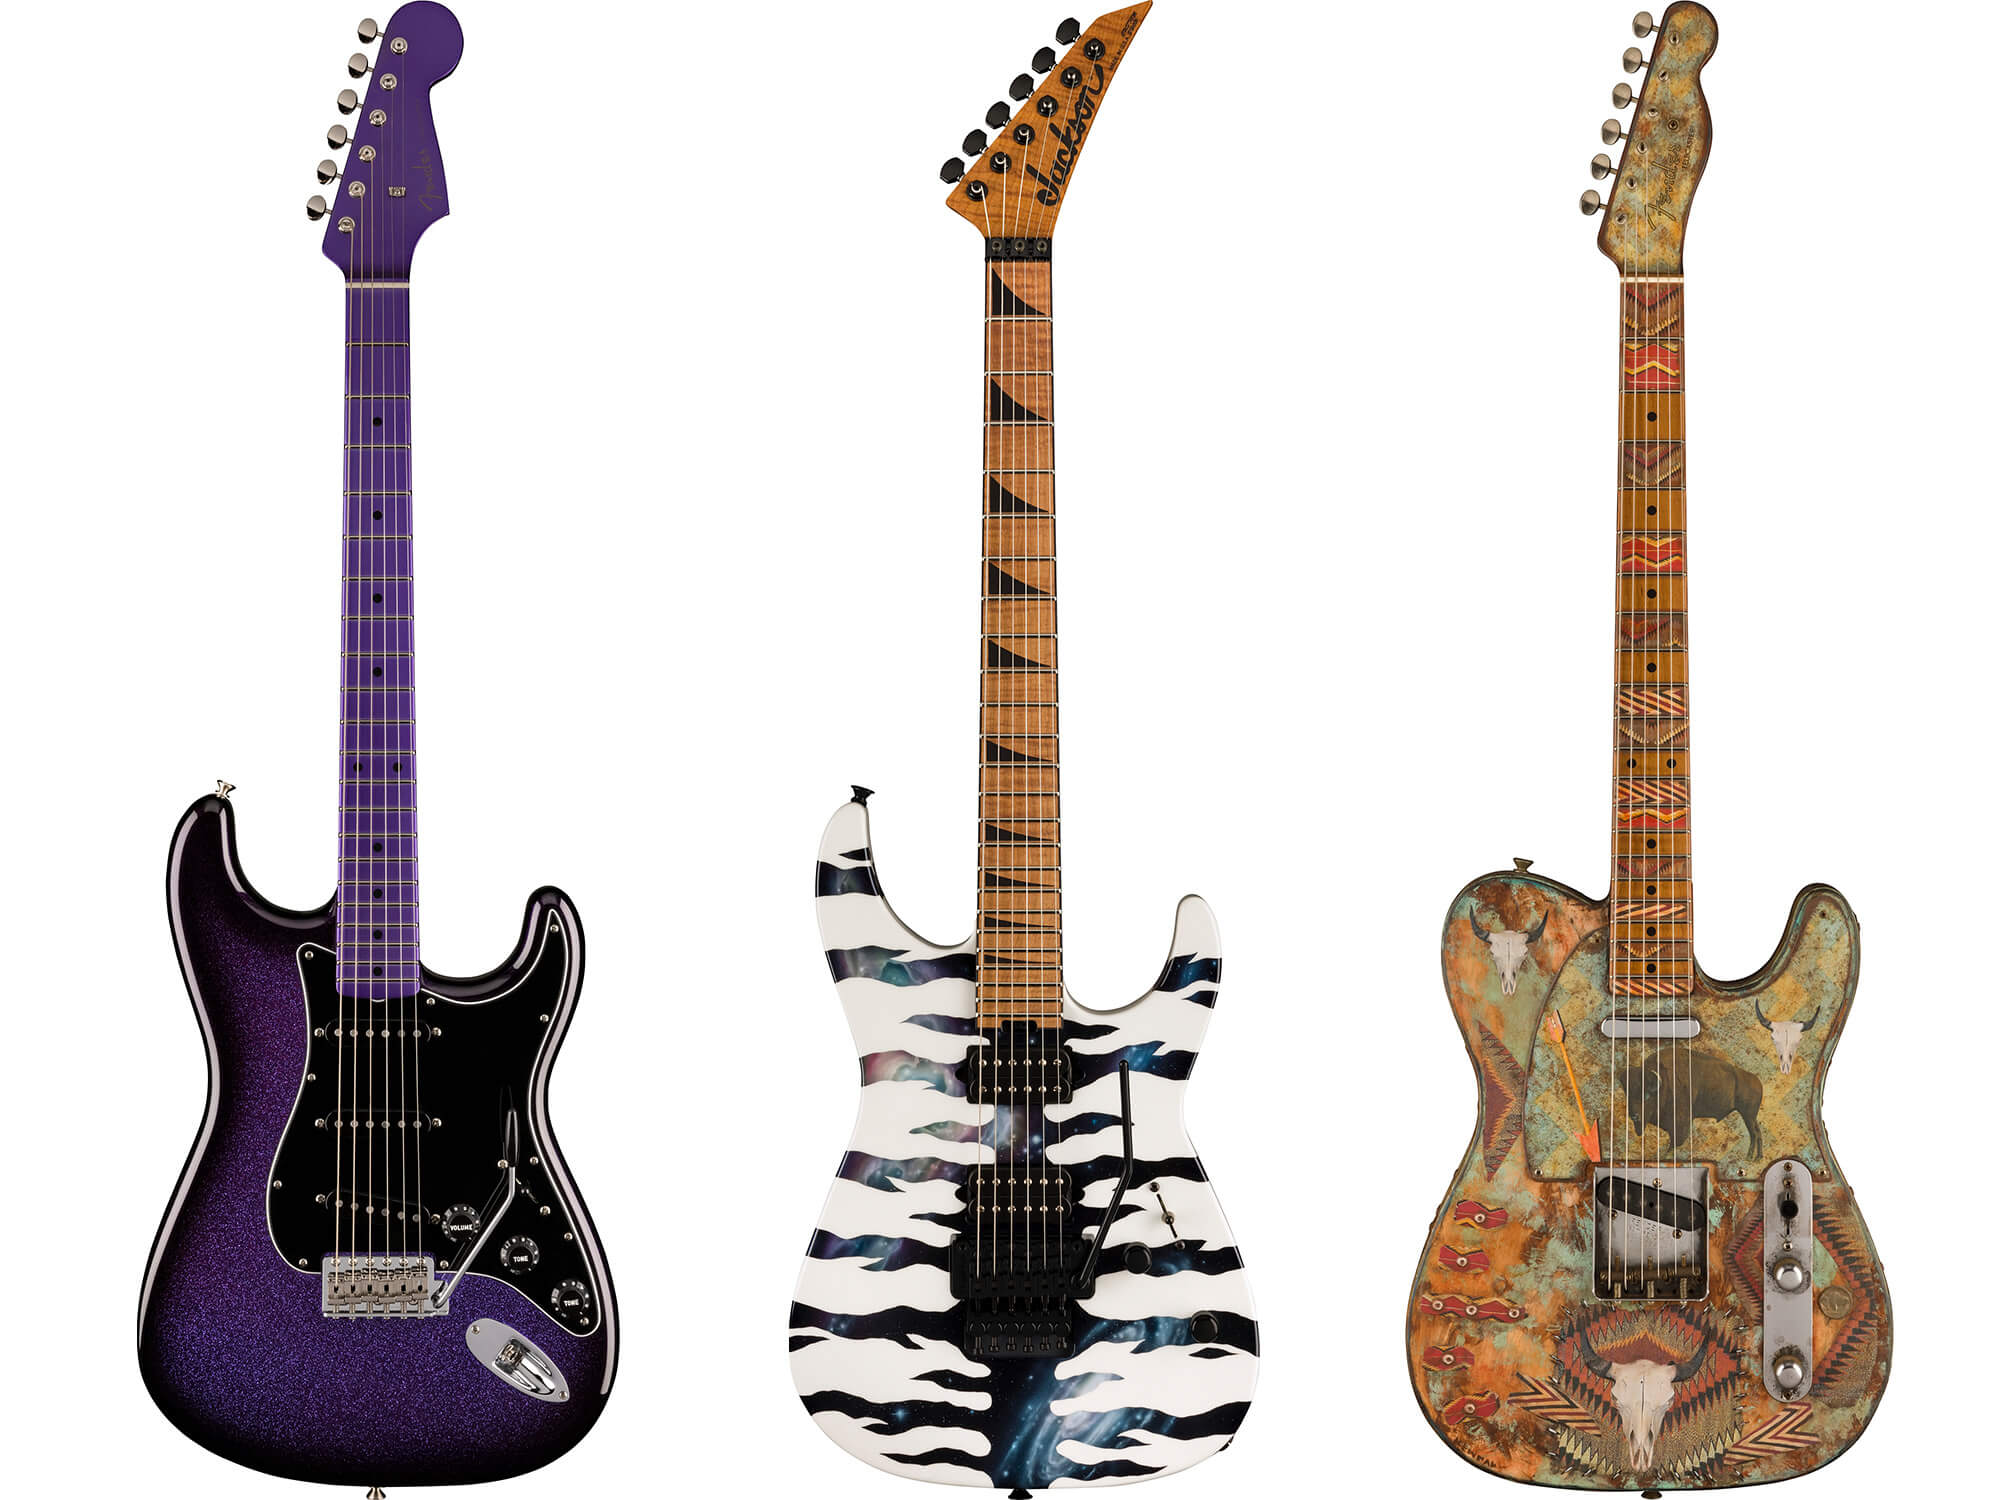 New models from Fender and Jackson